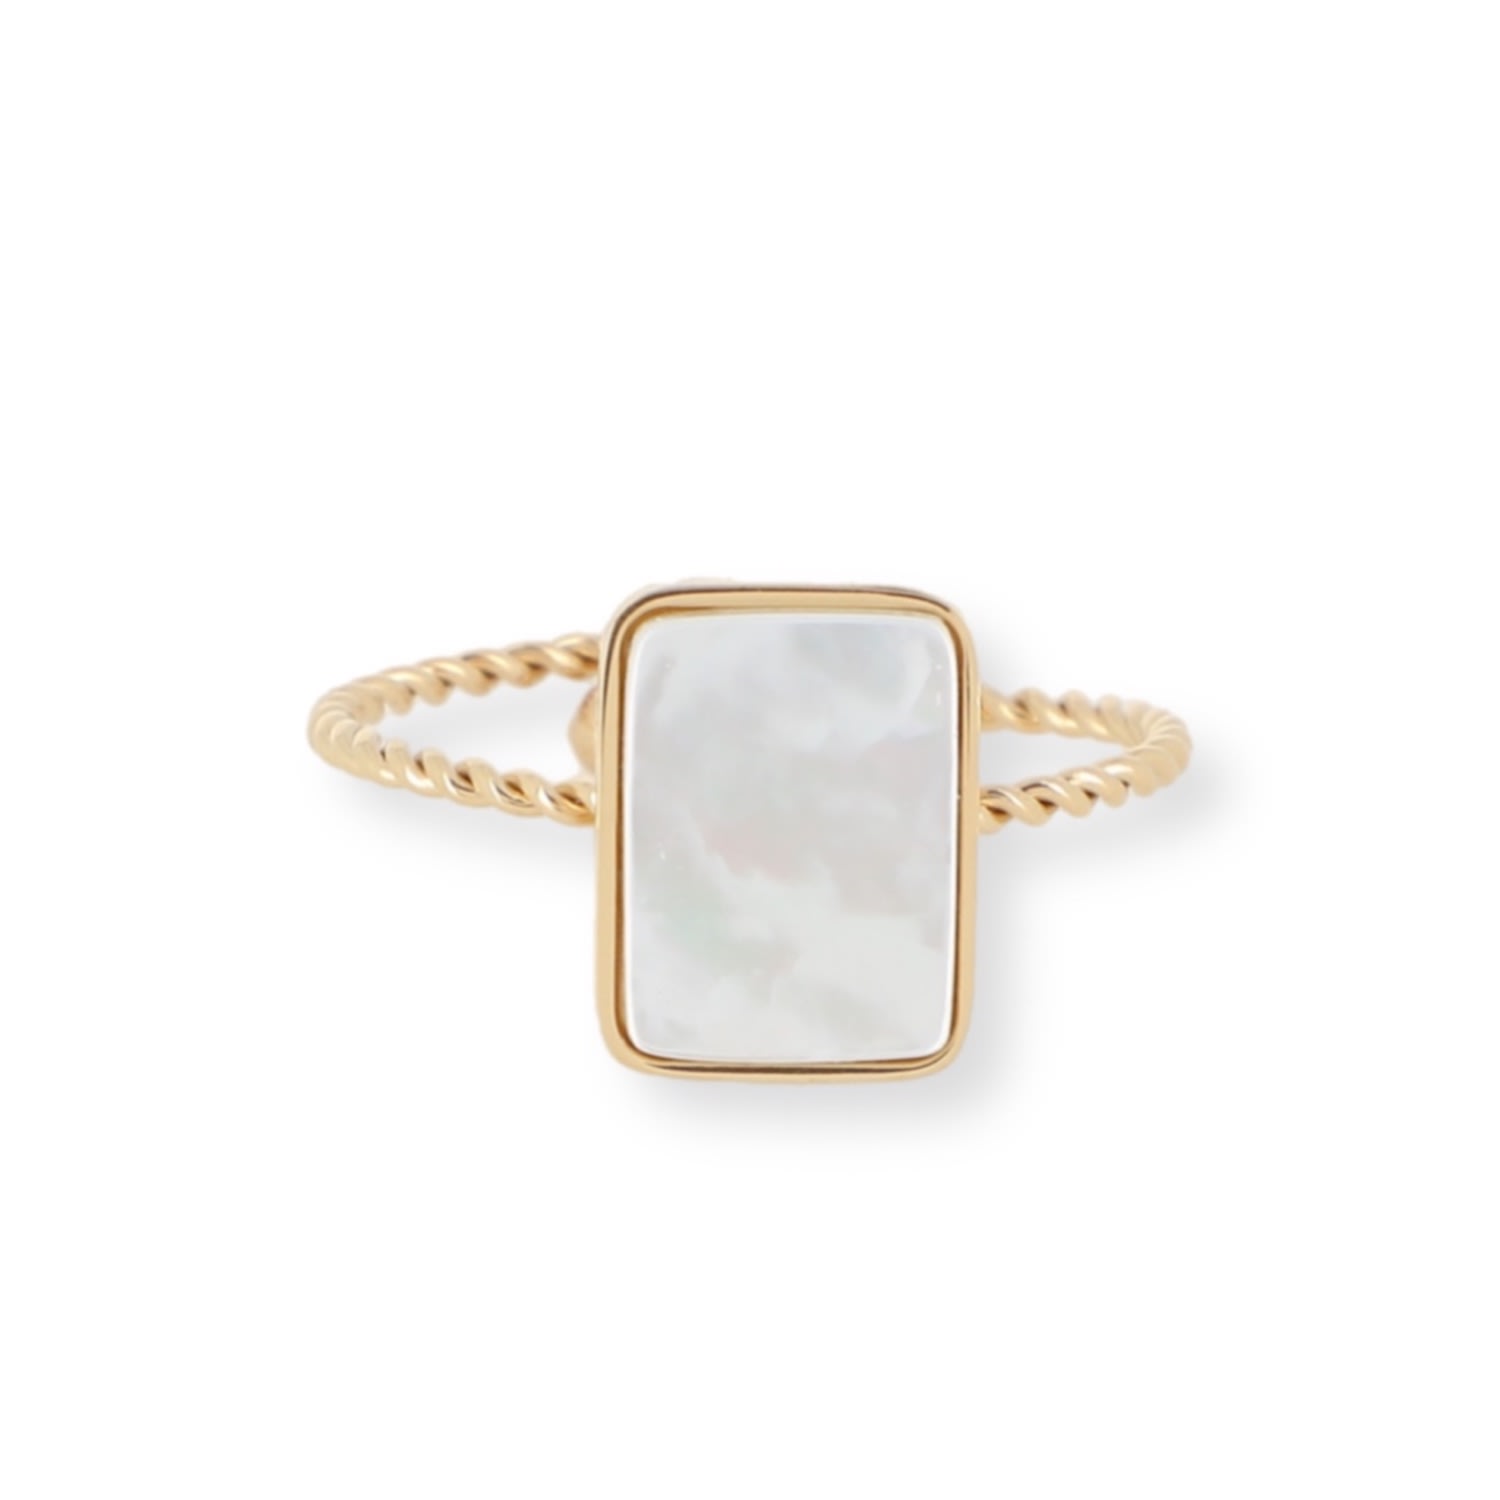 Mink&ivy Women's Gold / White Tiana Mother Of Pearl Ring, Tarnish Free Gold In Burgundy